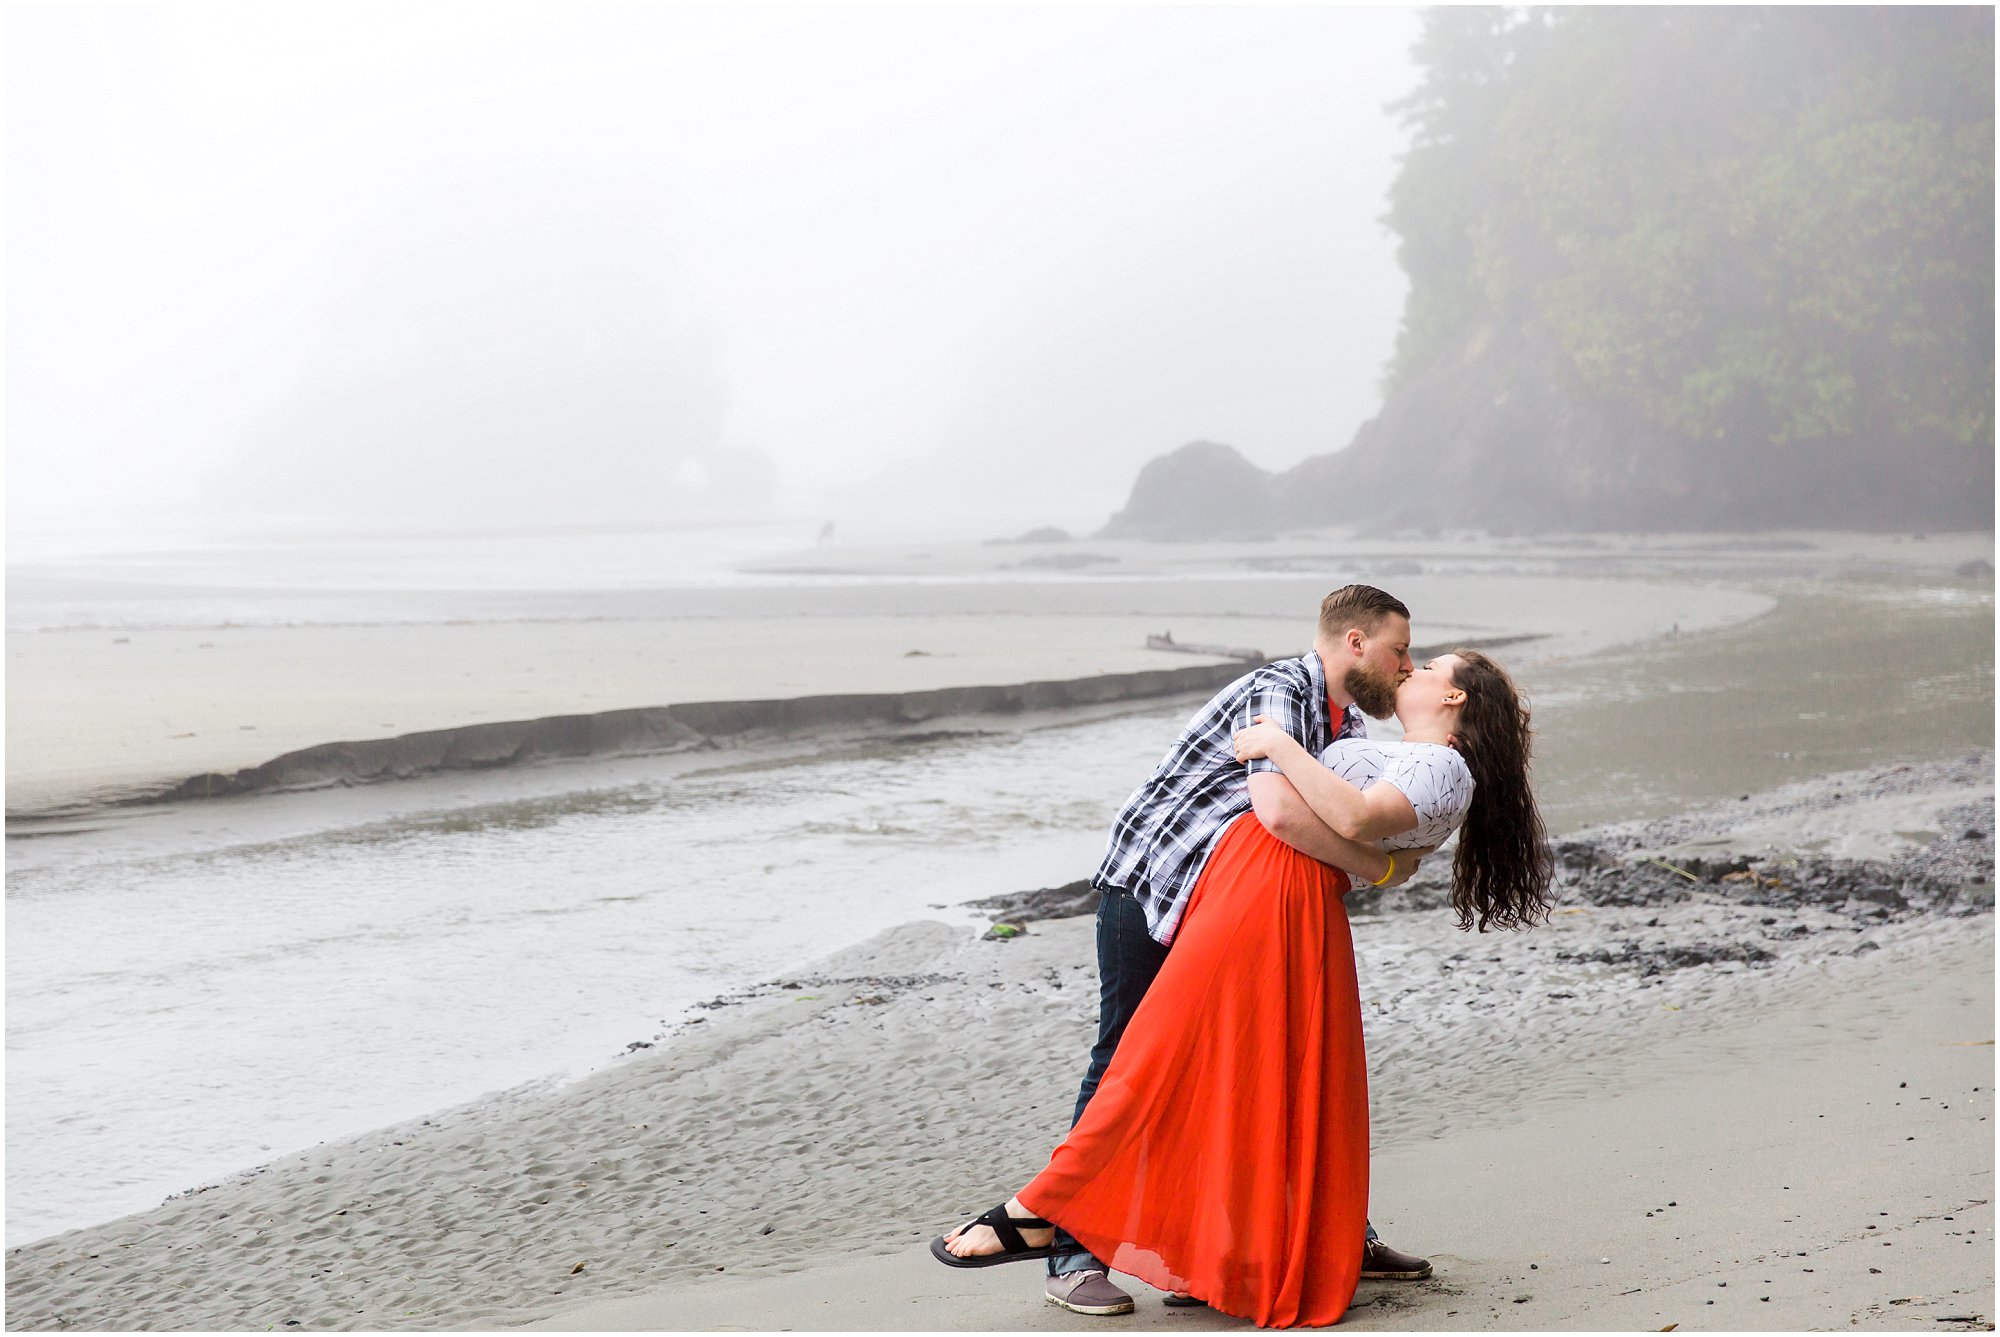 The classic dip of the bride at this beautiful coastal engagement photography session in WA. | Erica Swantek Photography